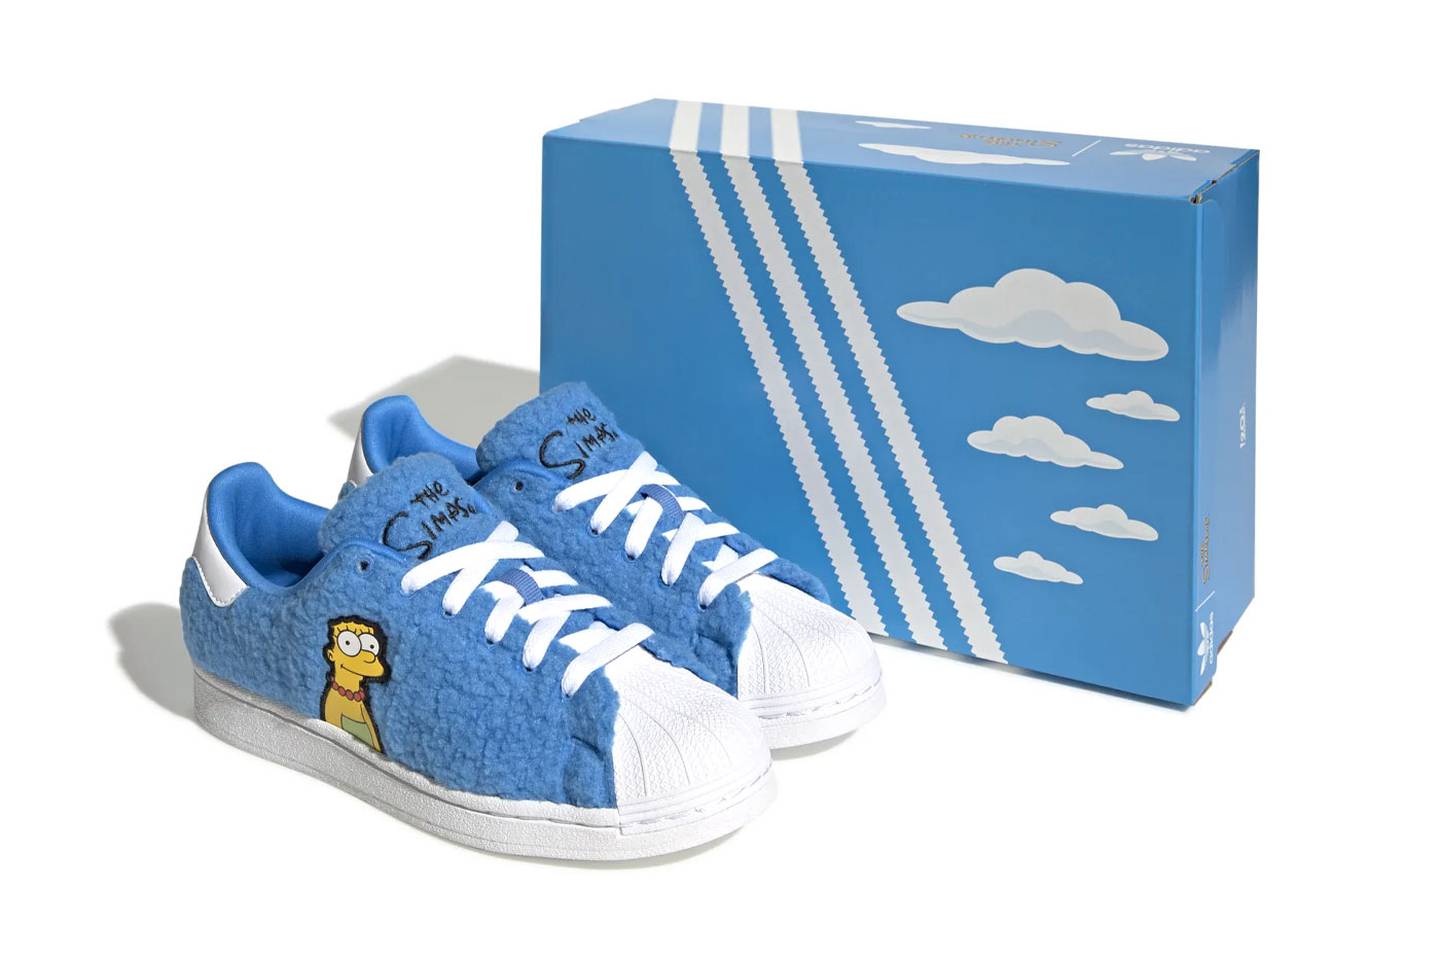 The Simpsons x Adidas Superstar Marge Simpson